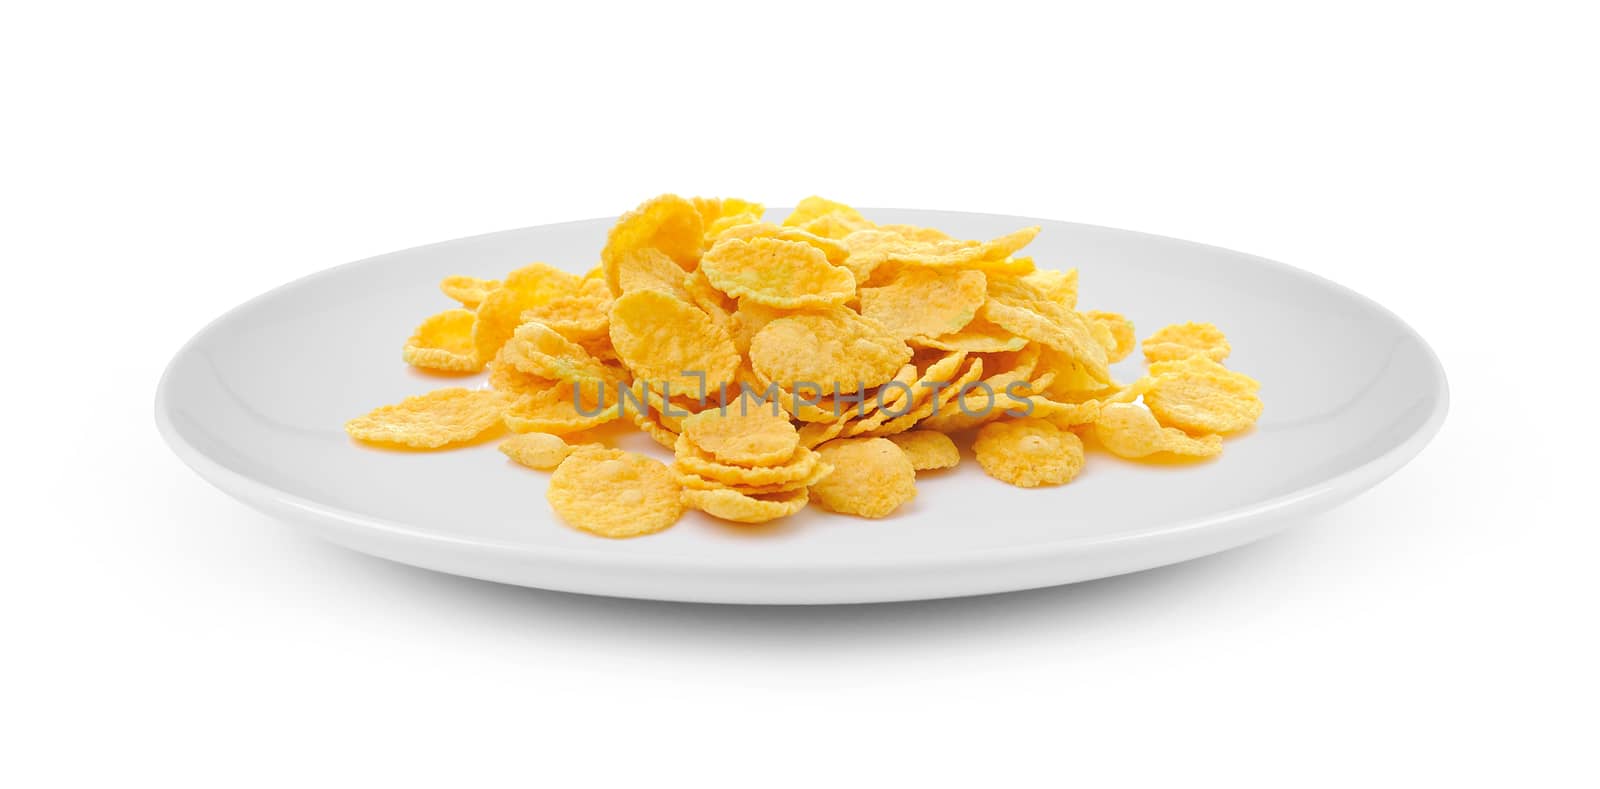 tasty cornflakes in plate isolated on white background